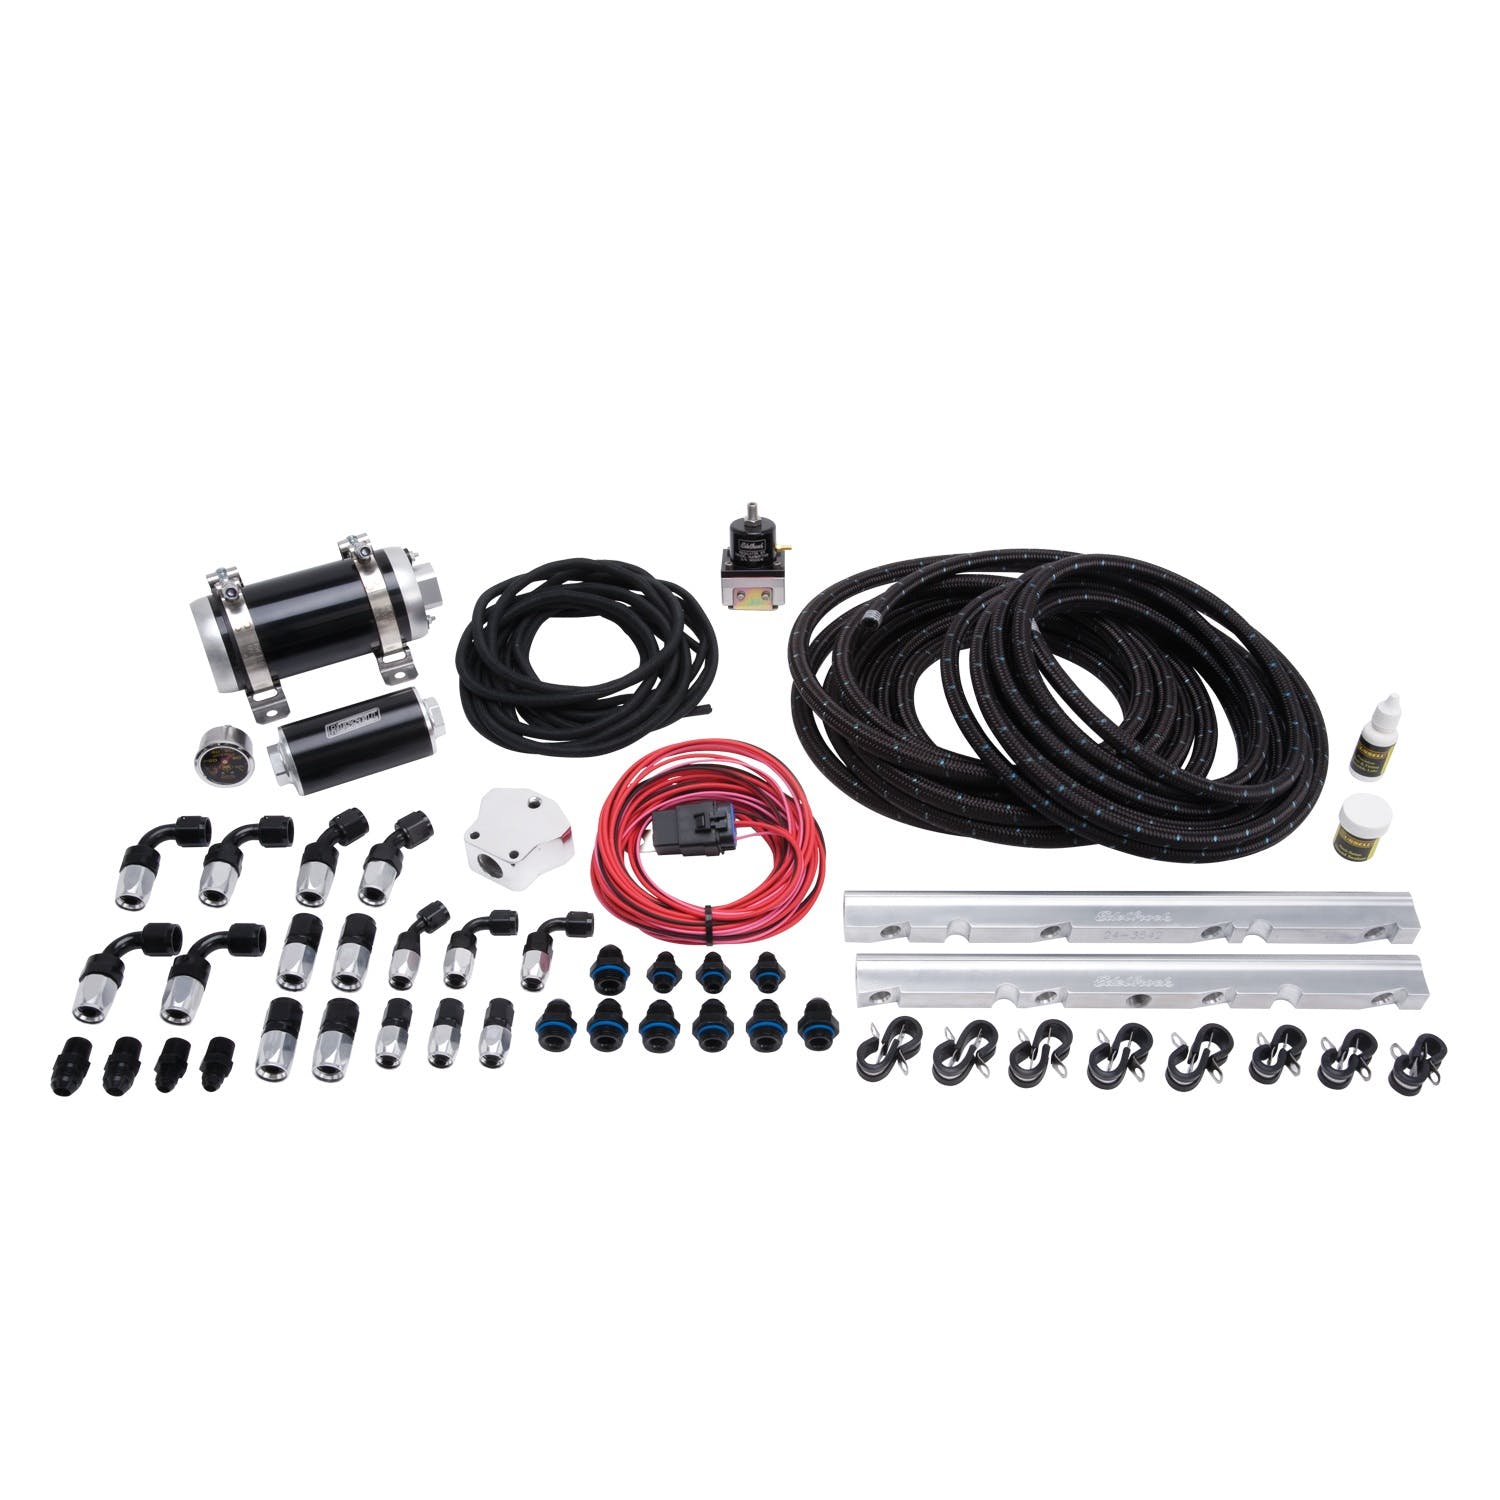 Russell 641543 Fuel System EFI Plumb Kit Ford 5.0 Complete. Pro-Classic